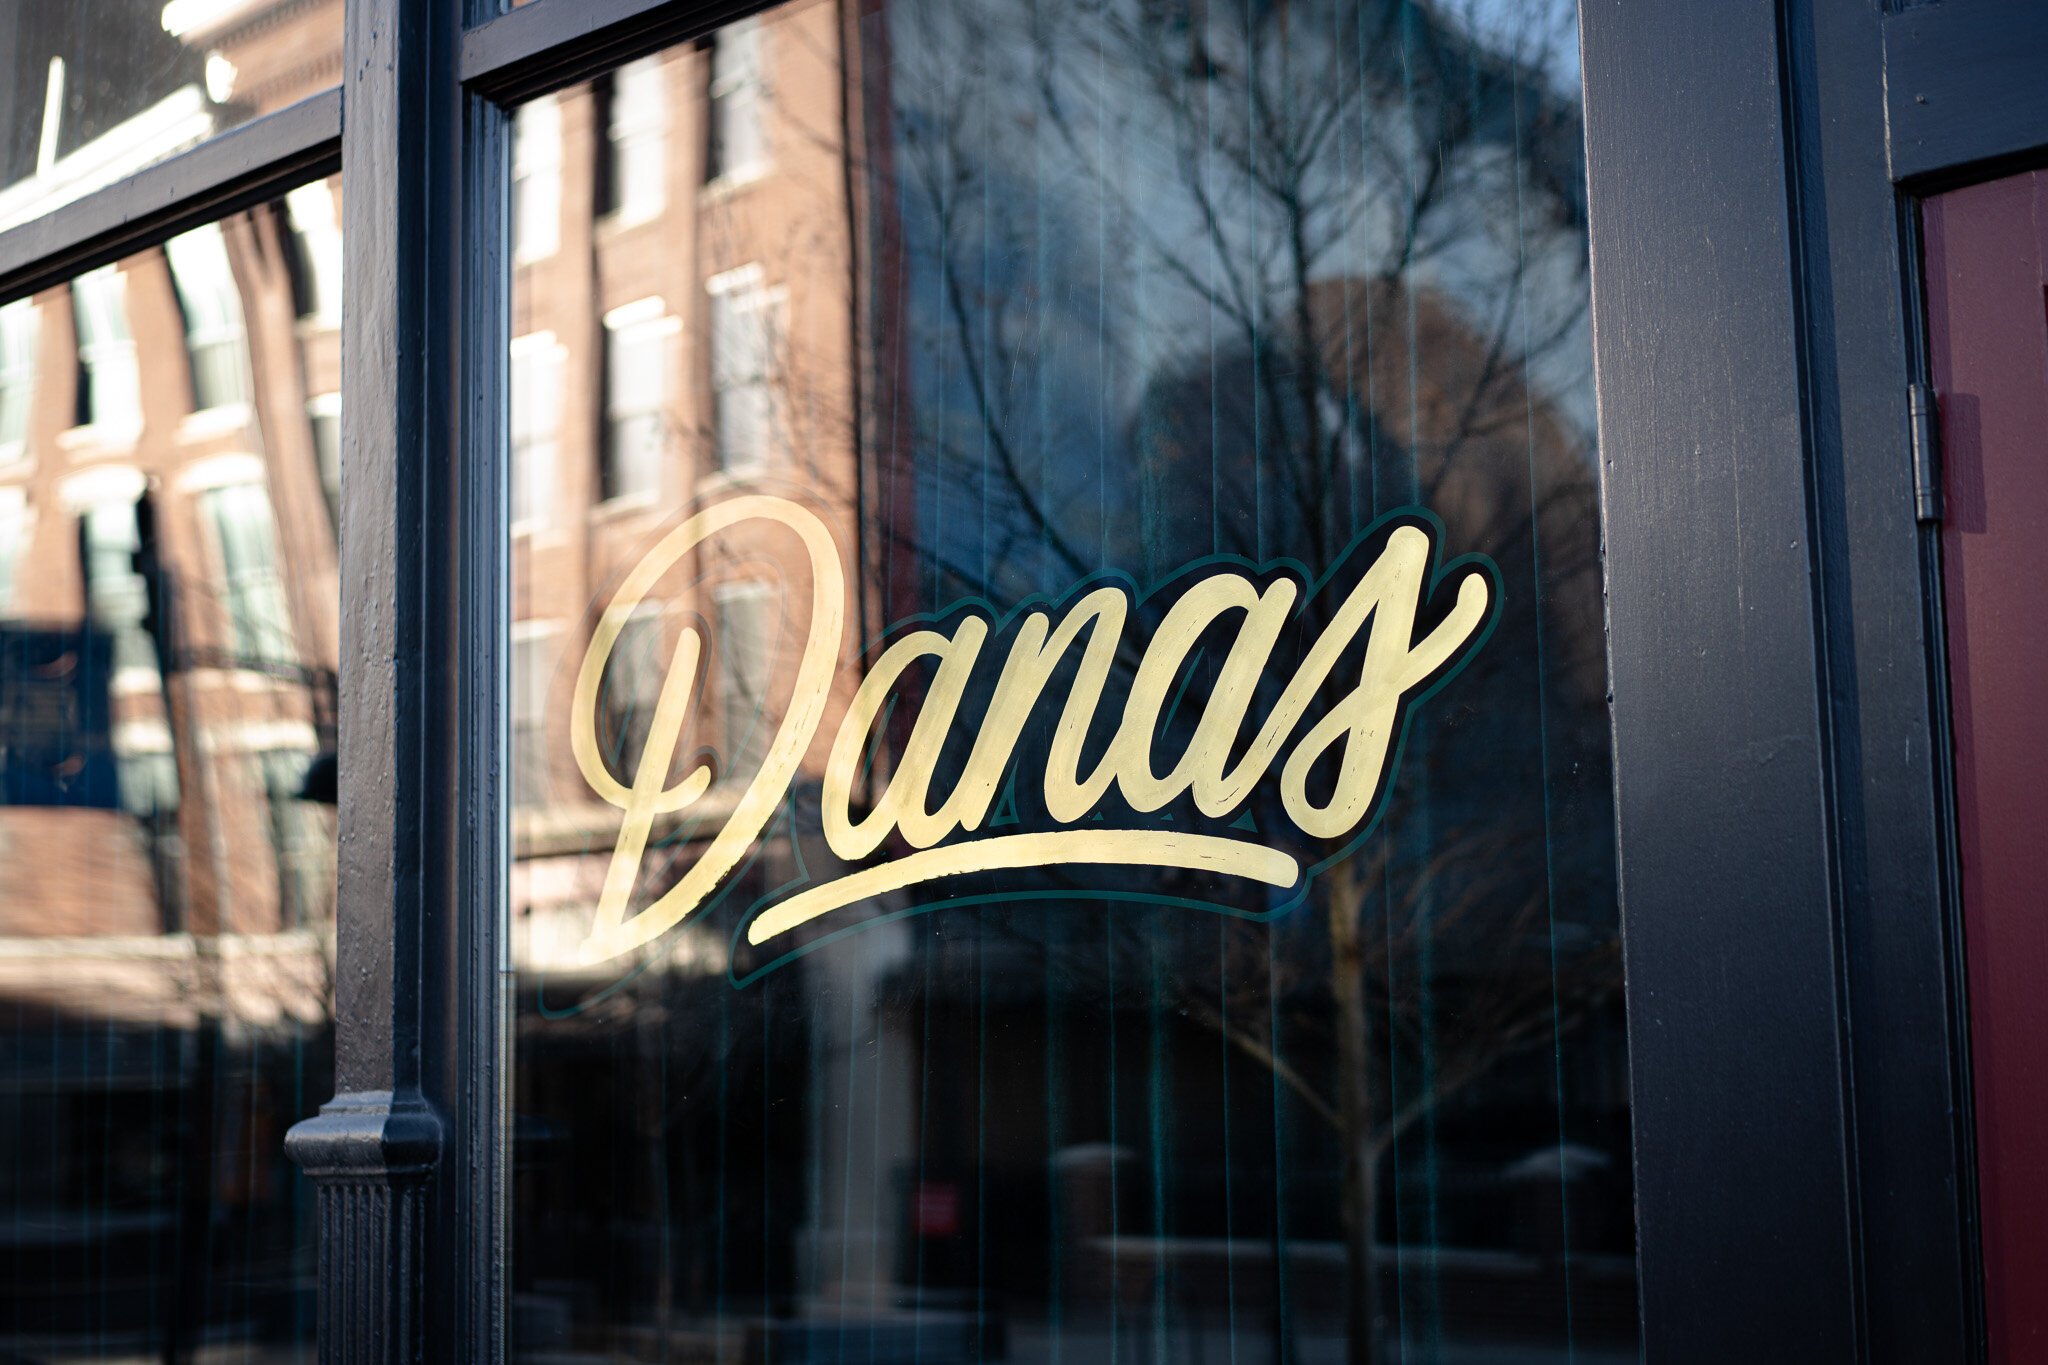 The Dana's logo painted by Justin Lim on the bar's front window.